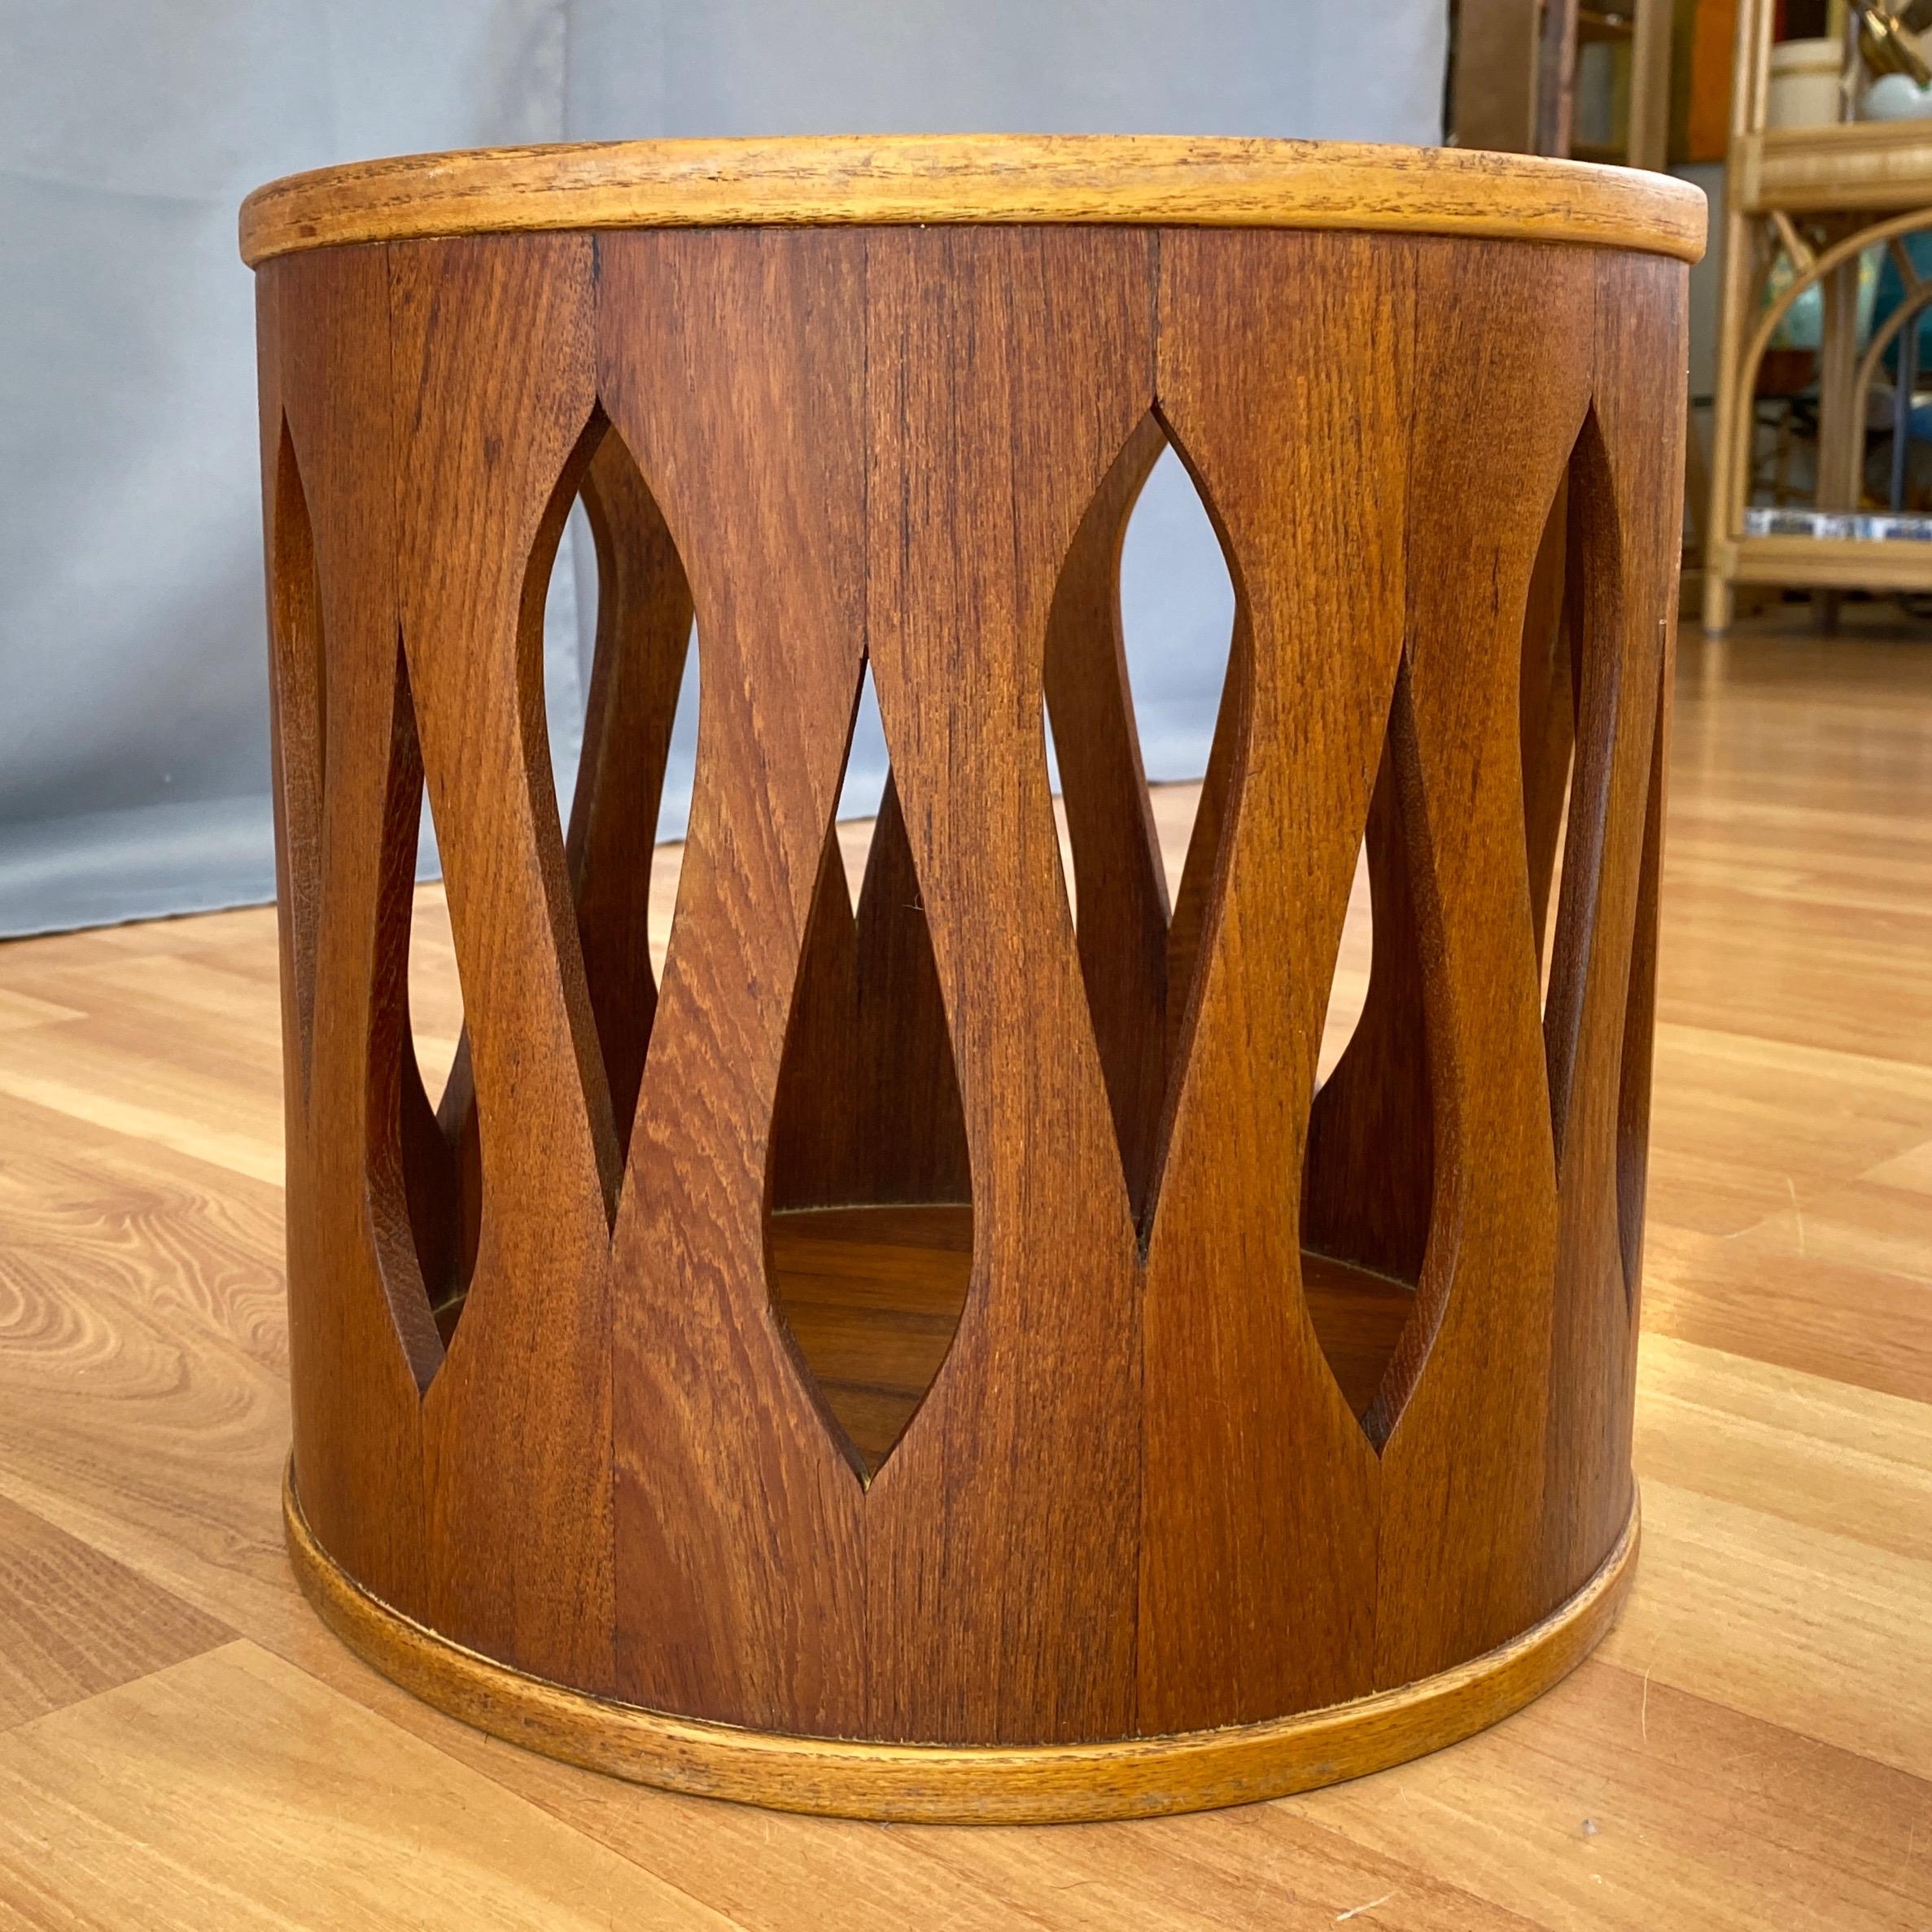 A fantastic late 1950s staved teak wastepaper basket, stool, or small table by Jens Quistgaard for Dansk from very early in his decades-long role as their chief designer.

Teak drum form with striking spearhead-shaped cut-out design. Contrasting